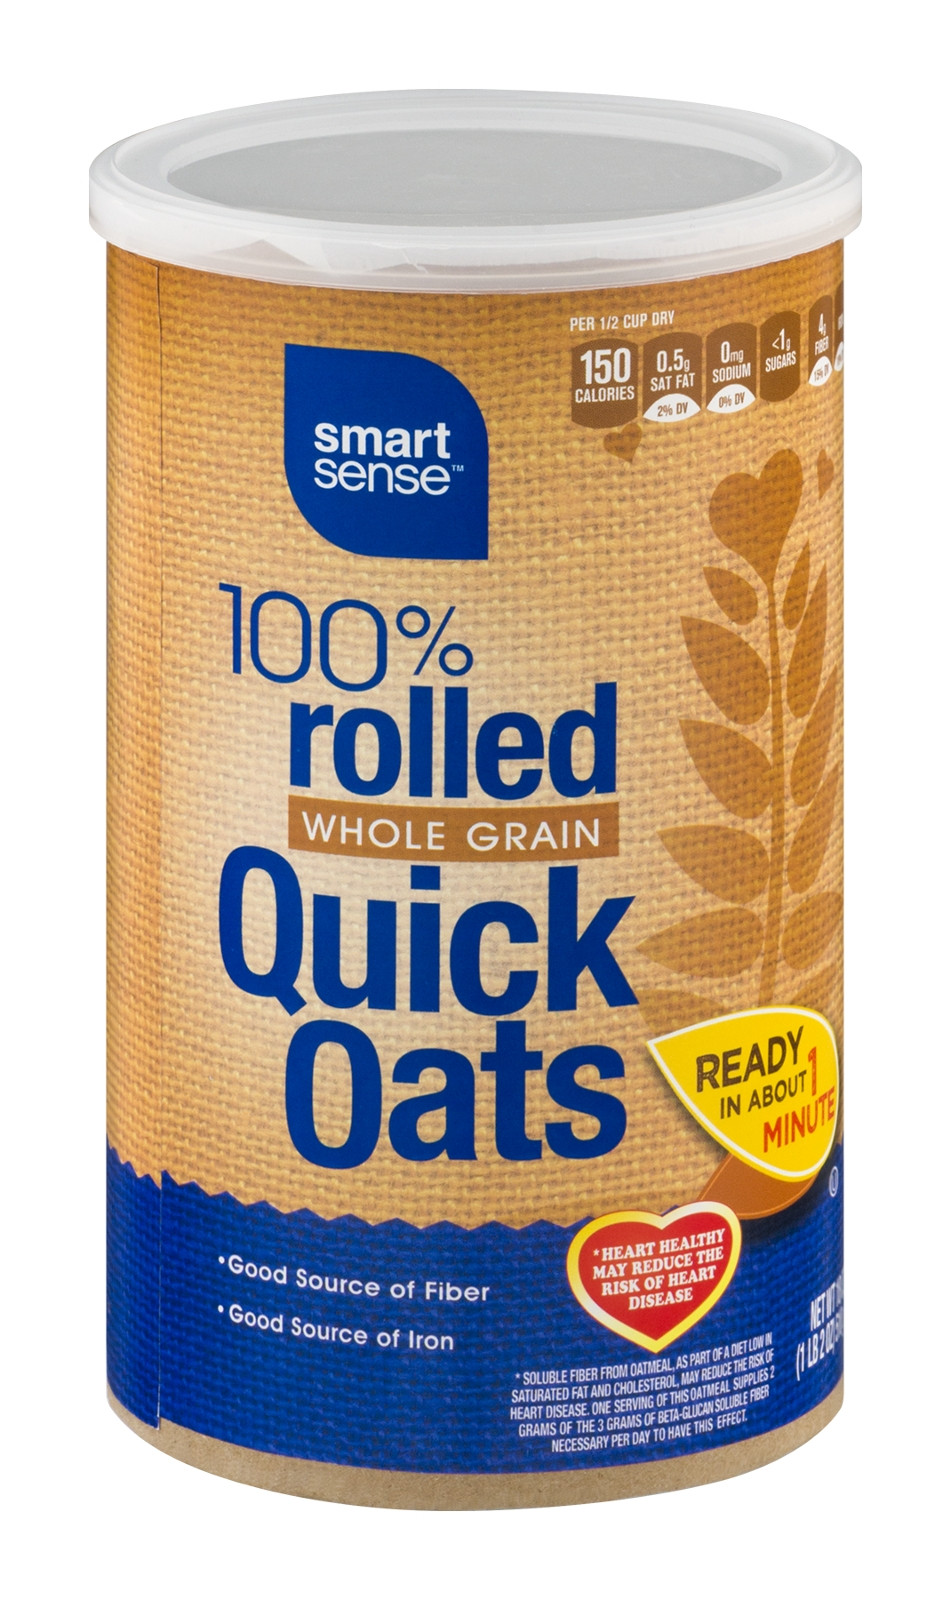 Are Quick Oats Healthy
 Smart Sense Rolled Whole Grain Quick Oats